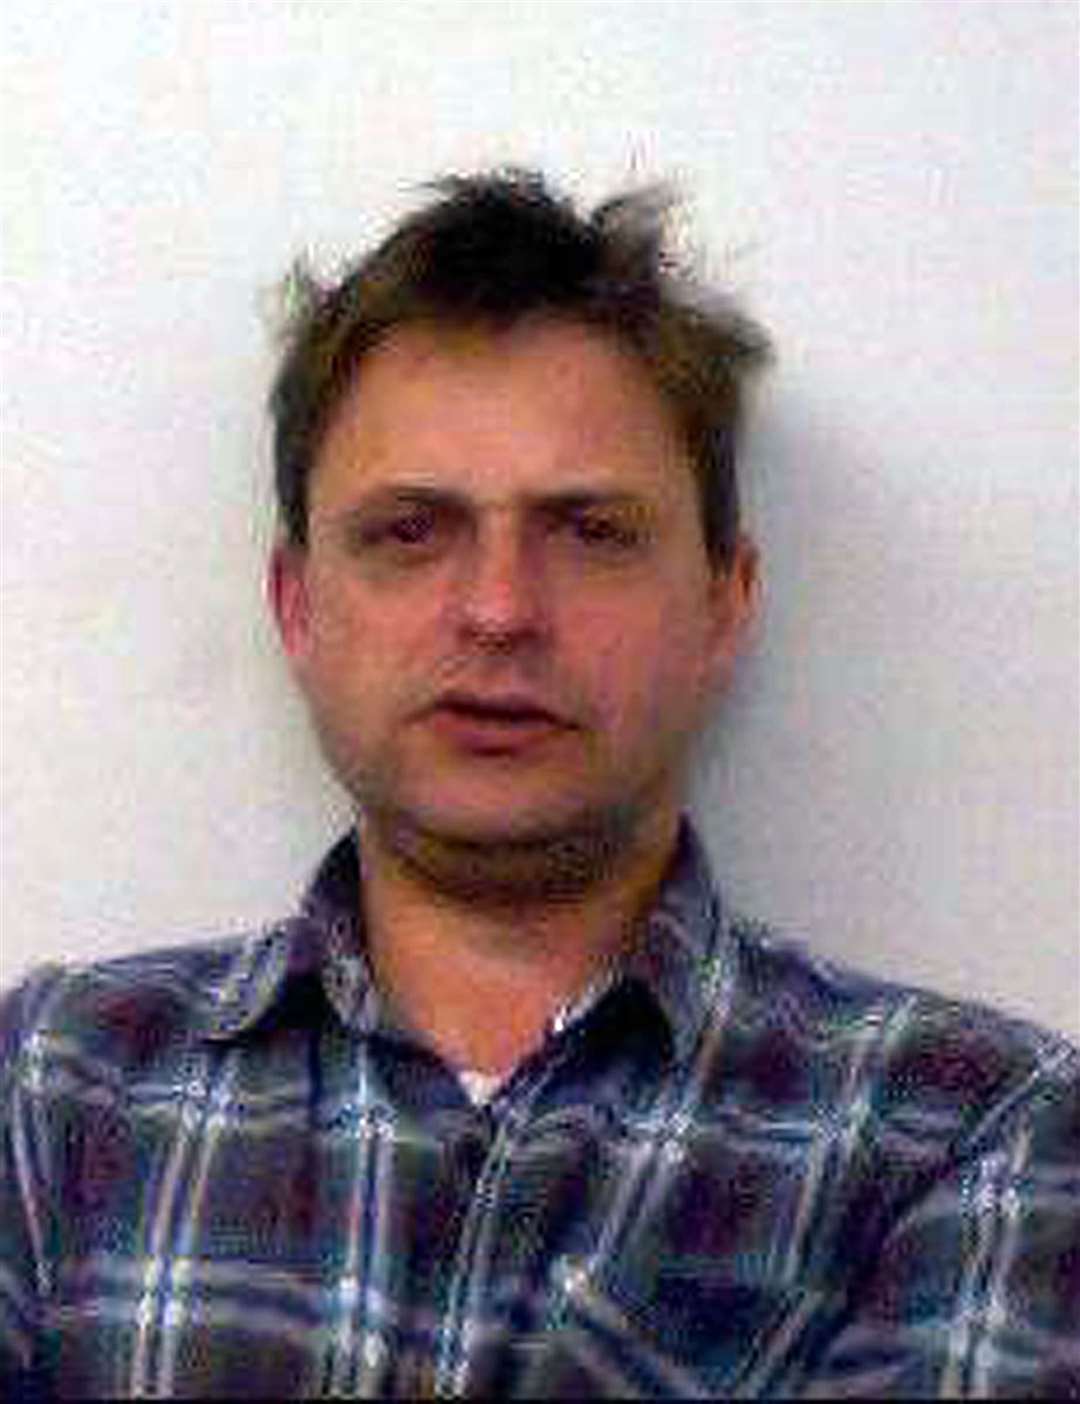 Edward Vines was jailed for eight years on Monday (Thames Valley Police/PA)